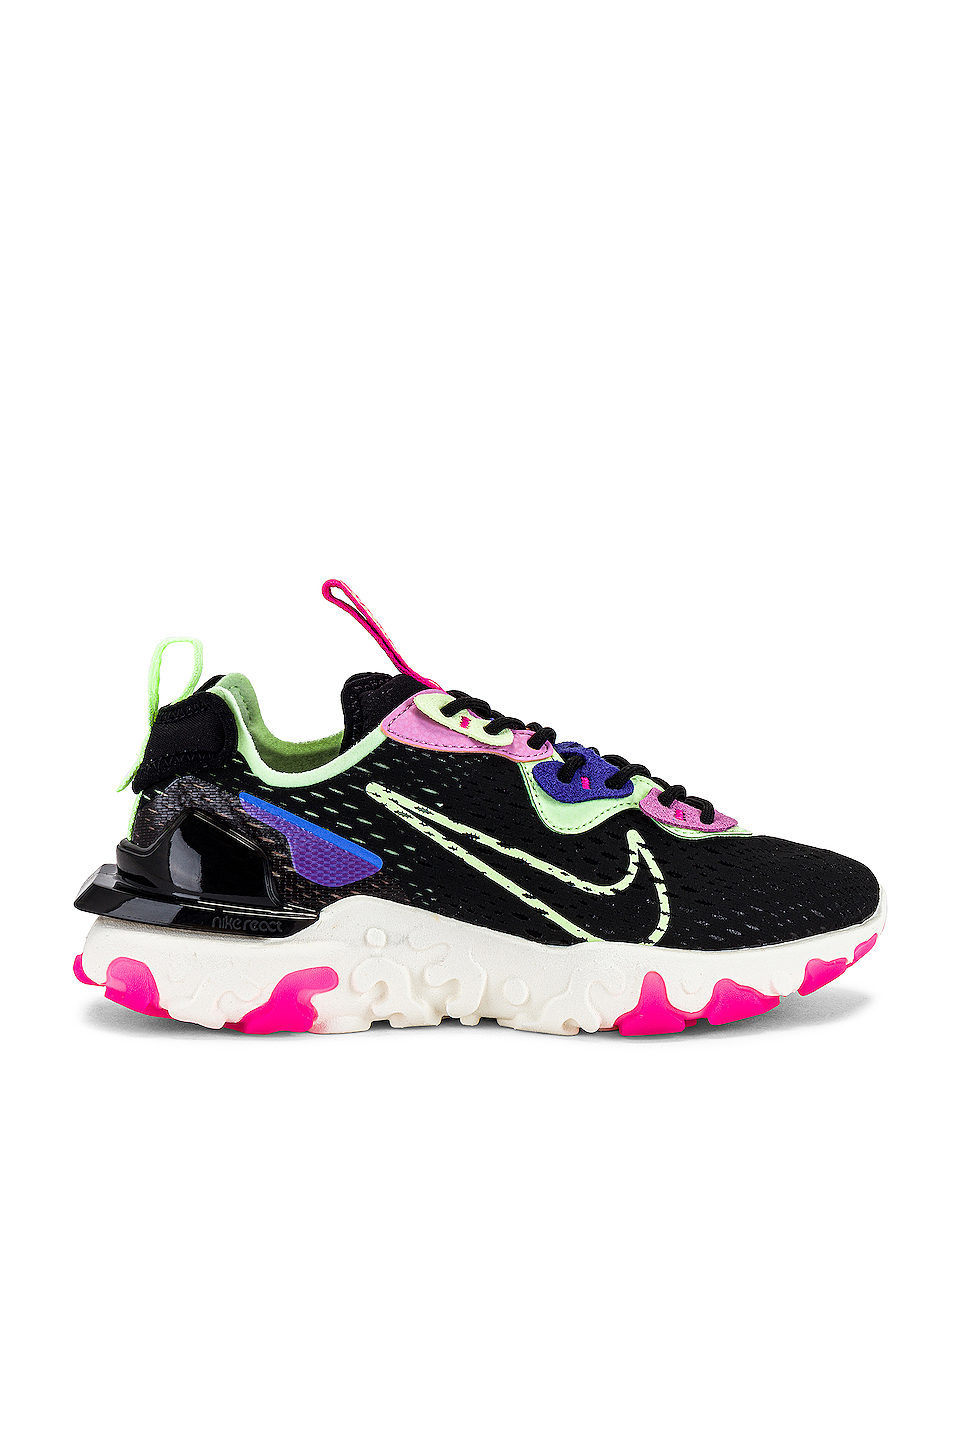 nike react vision barely volt pink